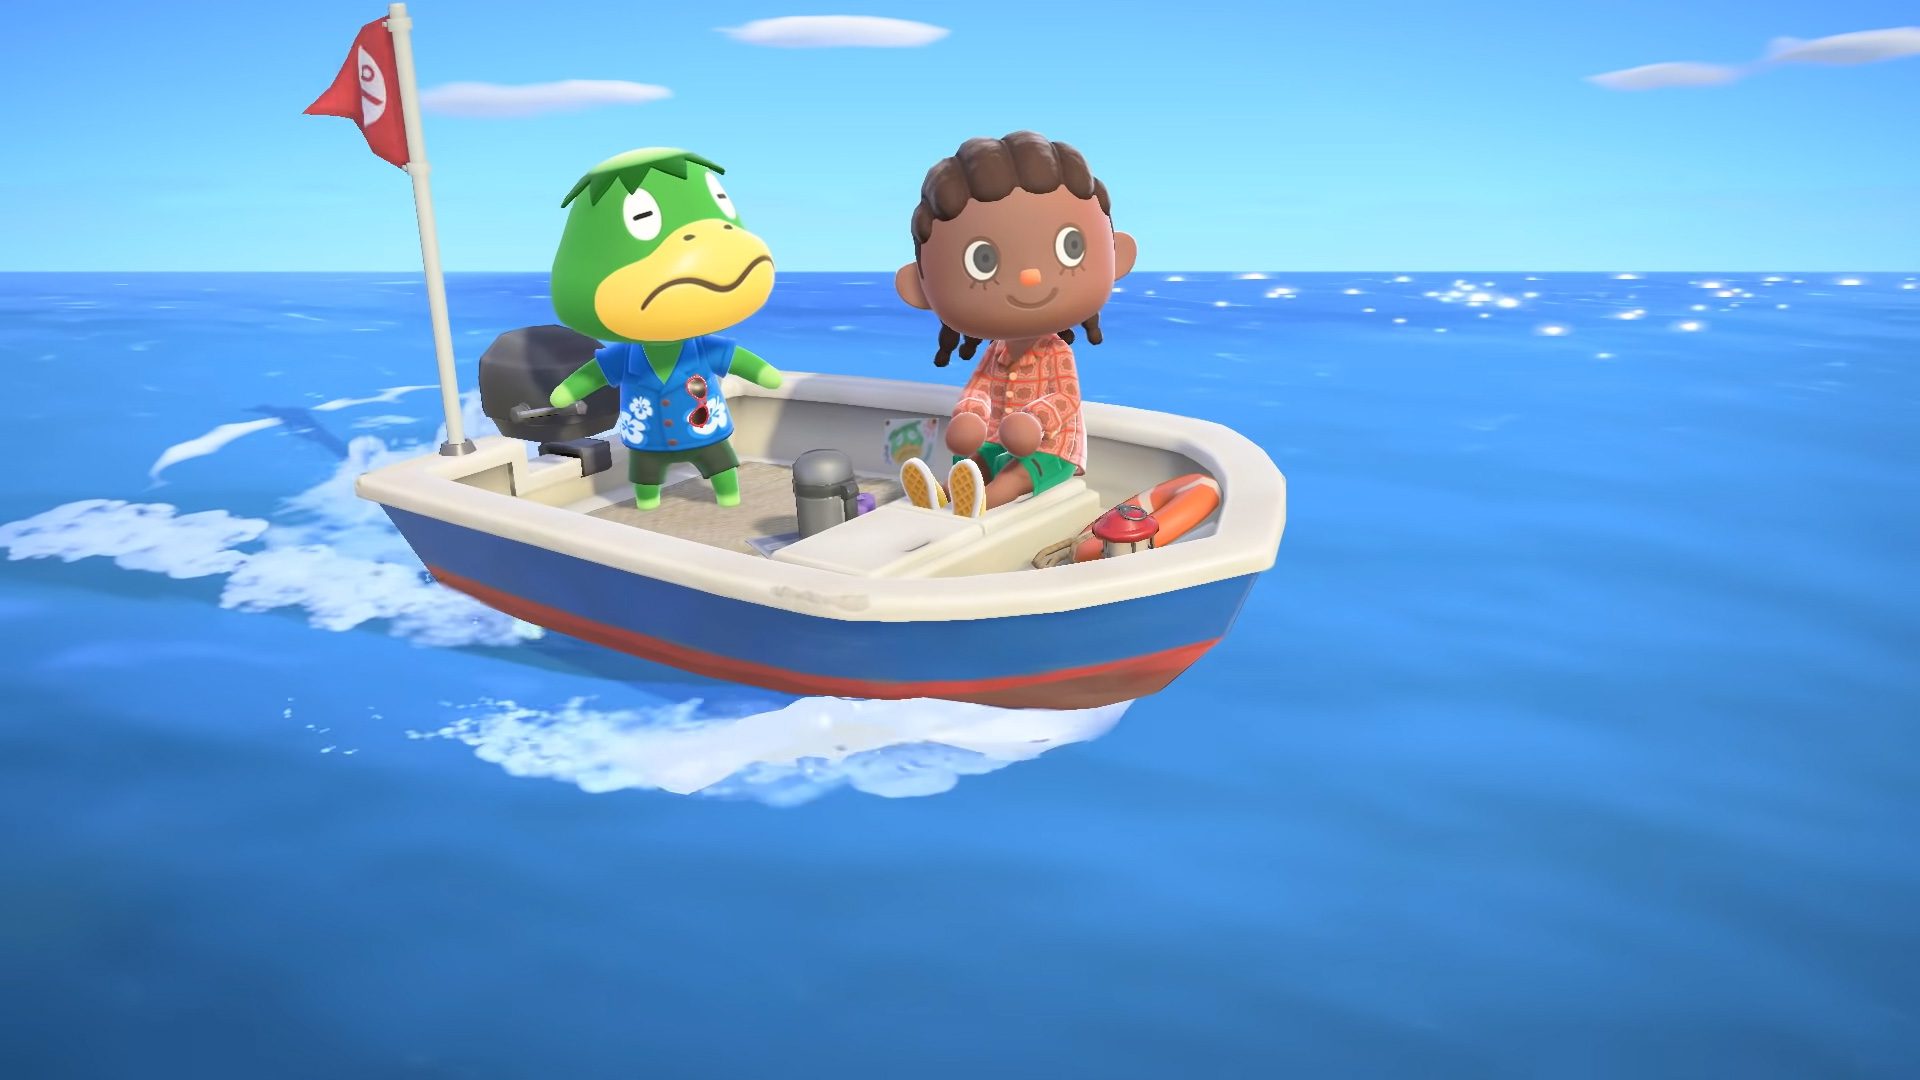 Animal Crossing: New Horizons 2.0 released early